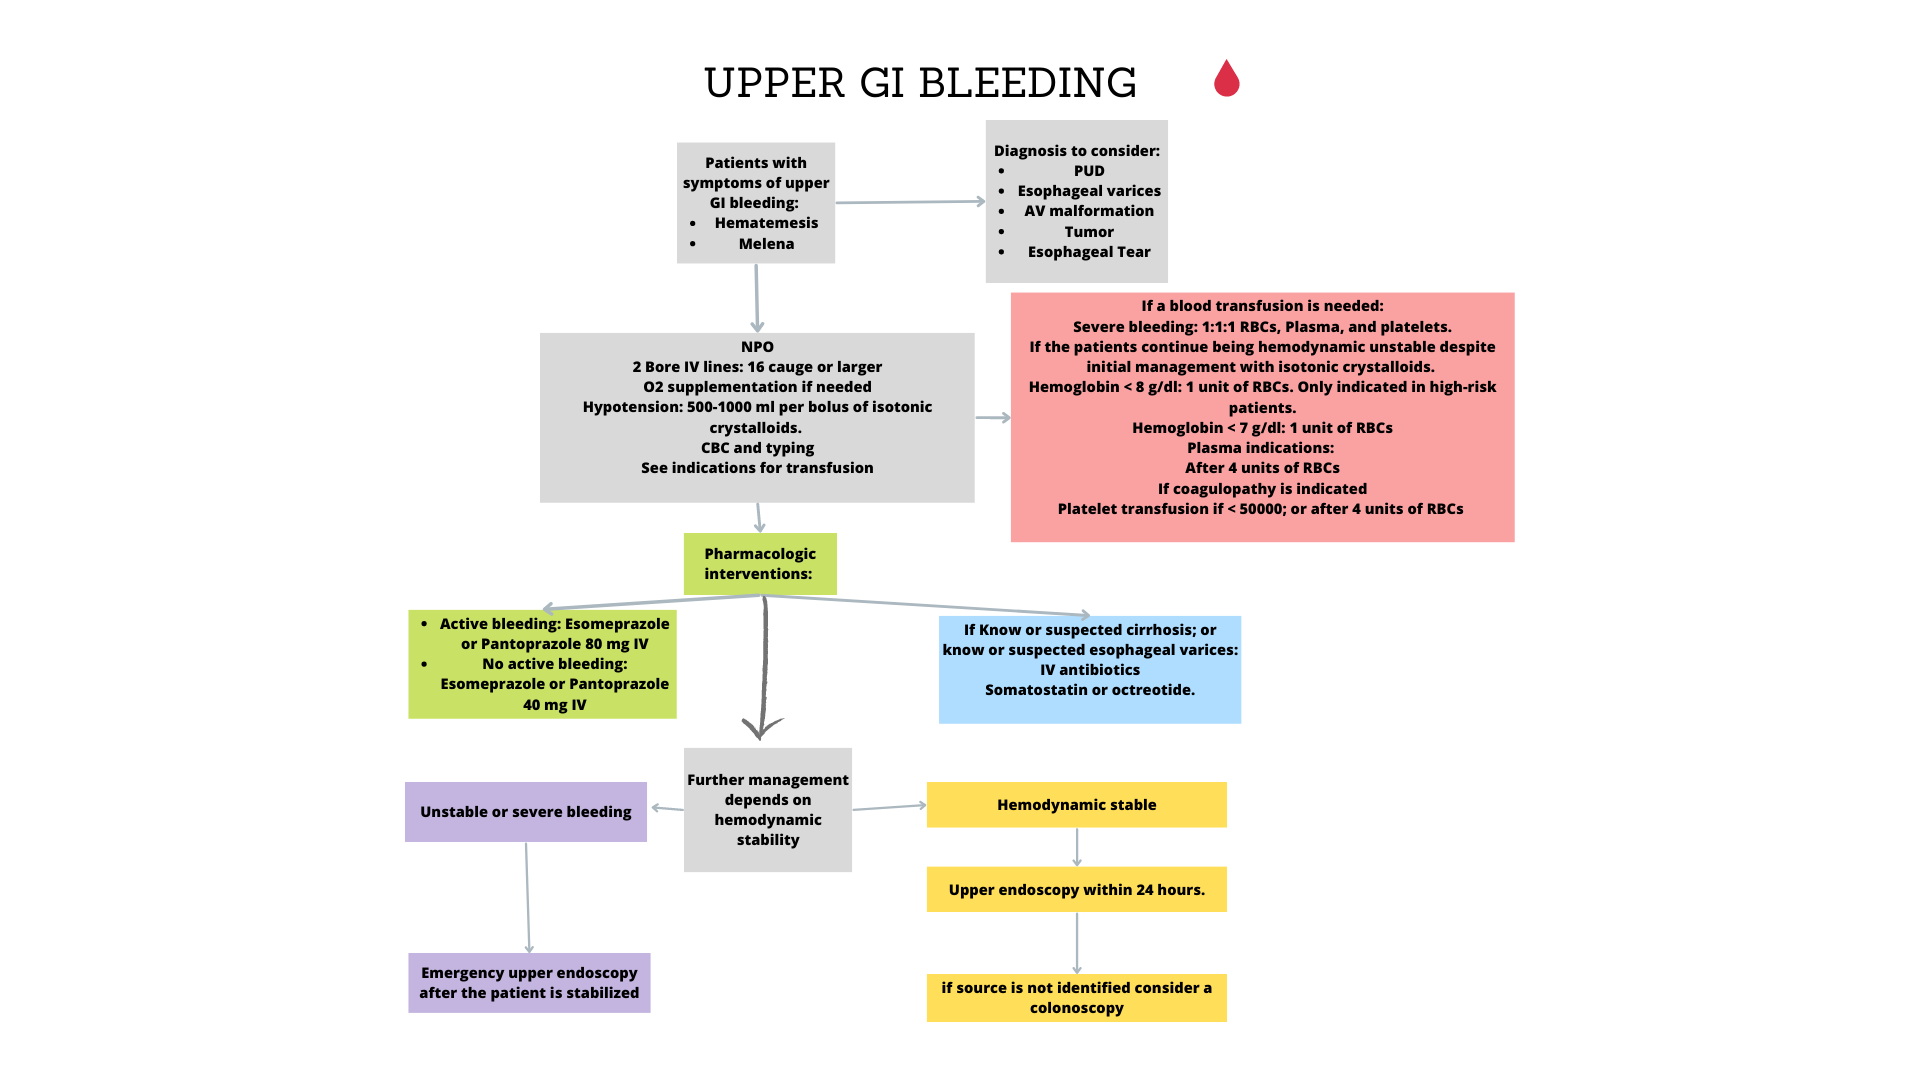 File:Upper GI bleeding. Adapted from ACG Clinical Guideline- Upper Gastrointestinal and Ulcer Bleeding.png